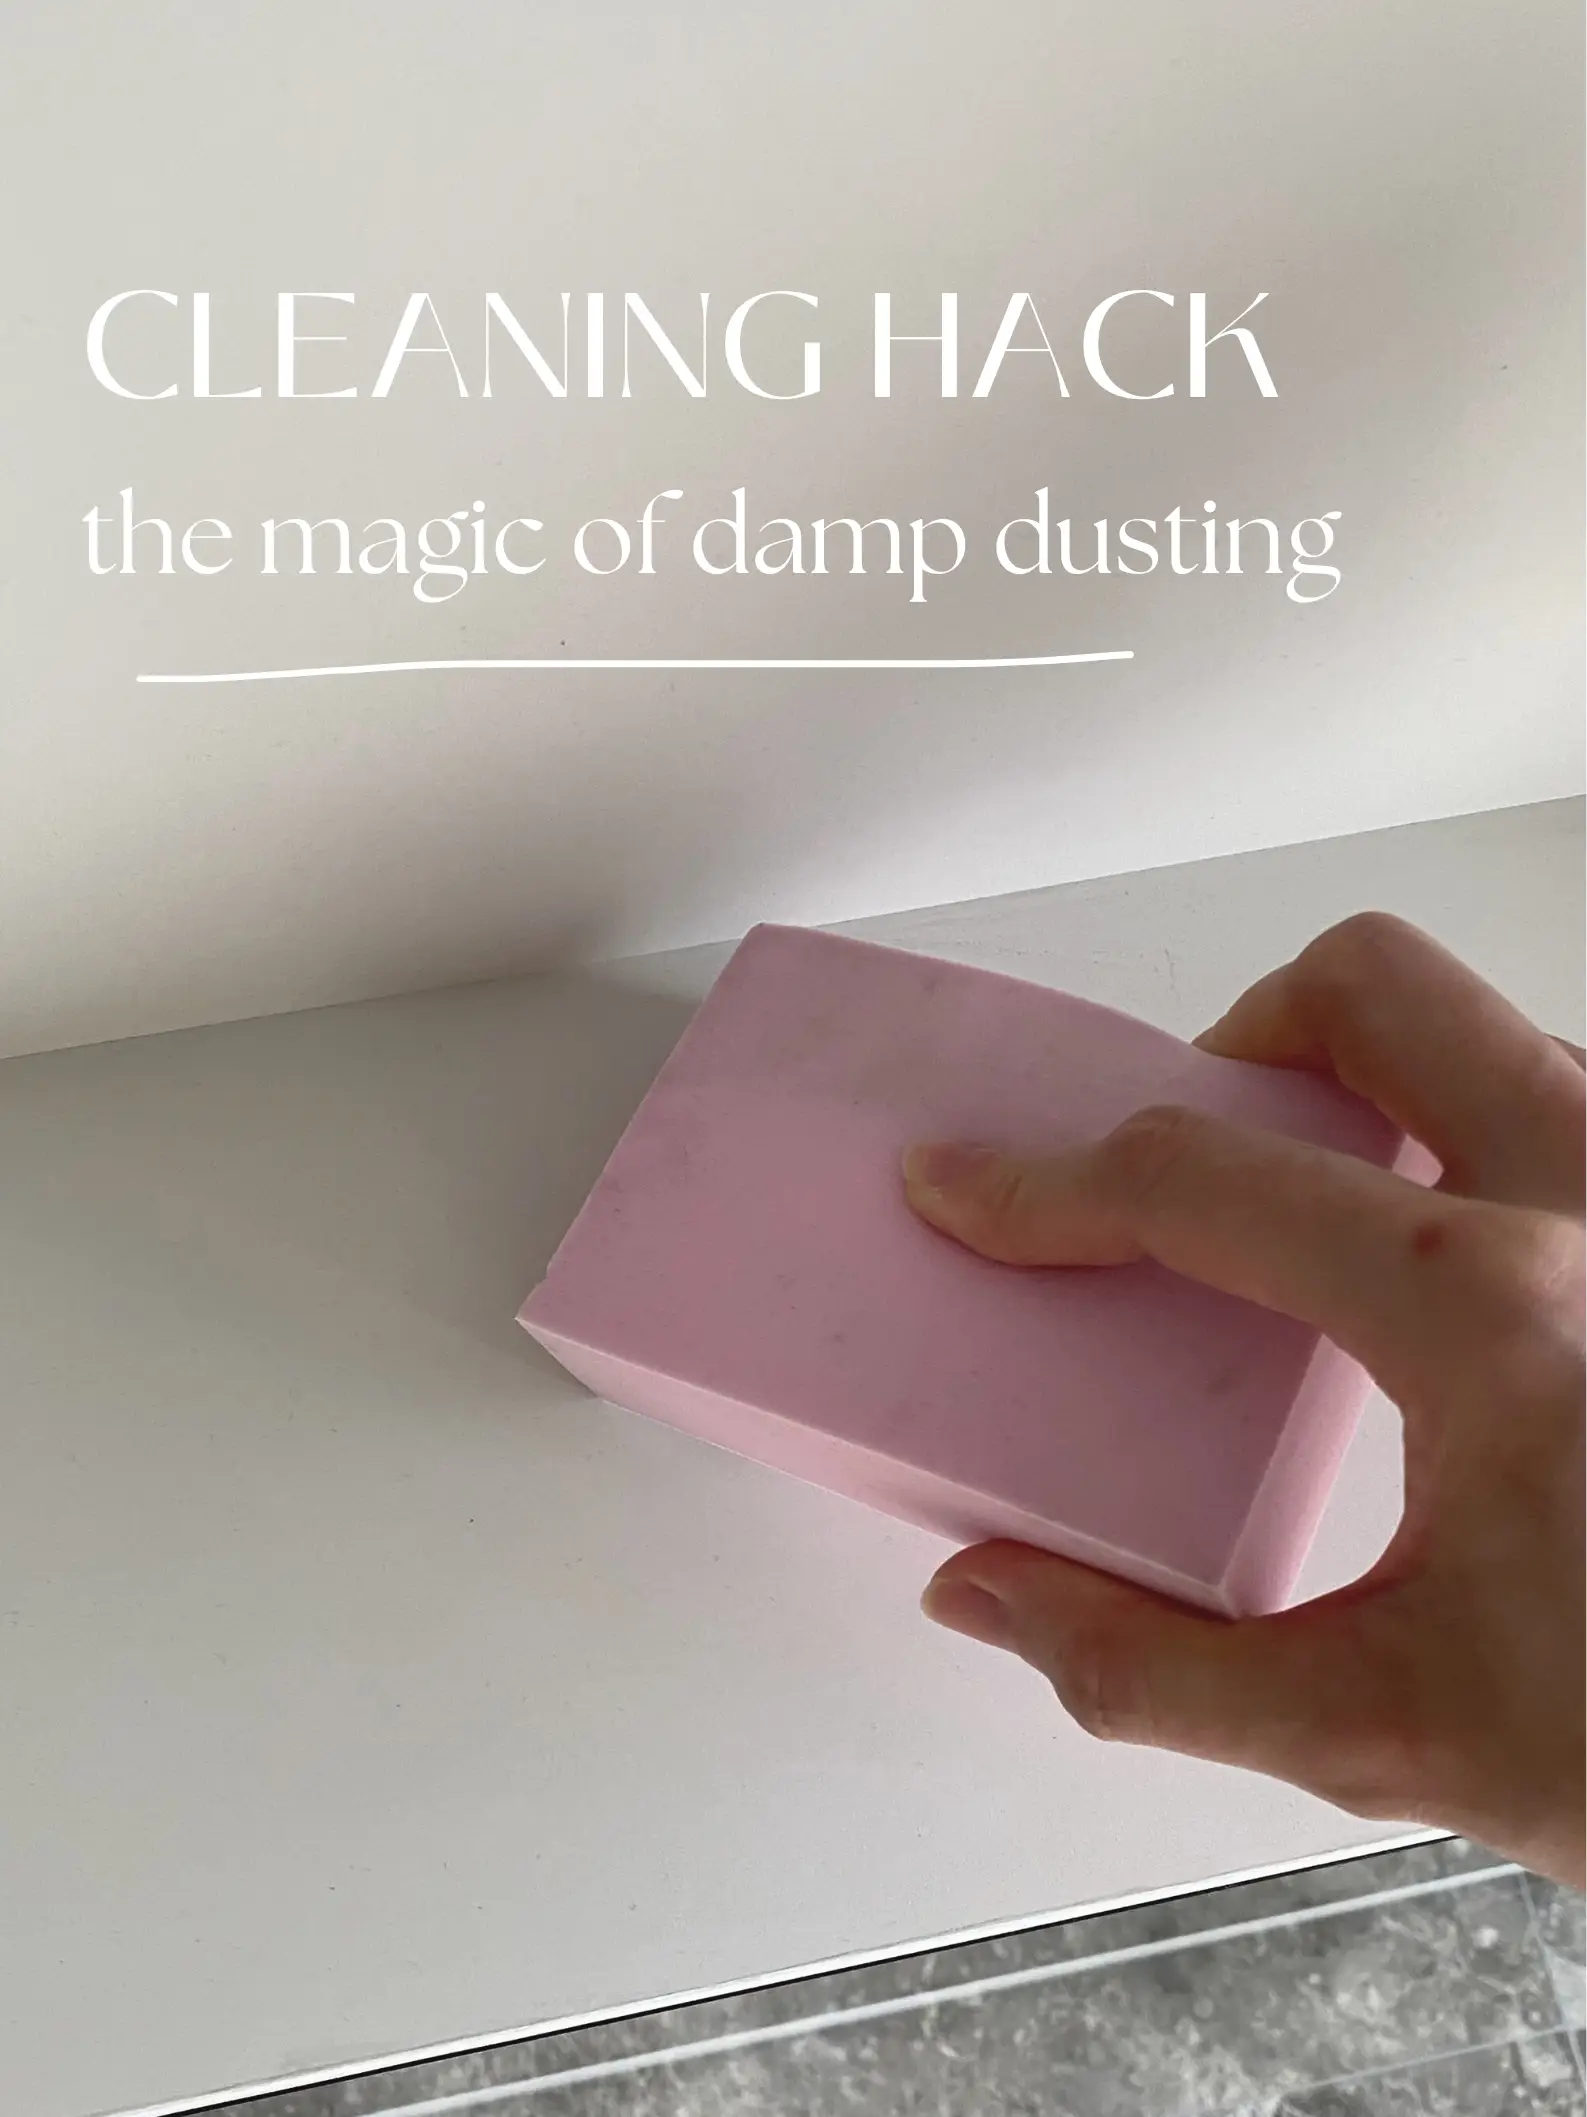 🌟 Say goodbye to dusty surfaces with damp dusting!'s images